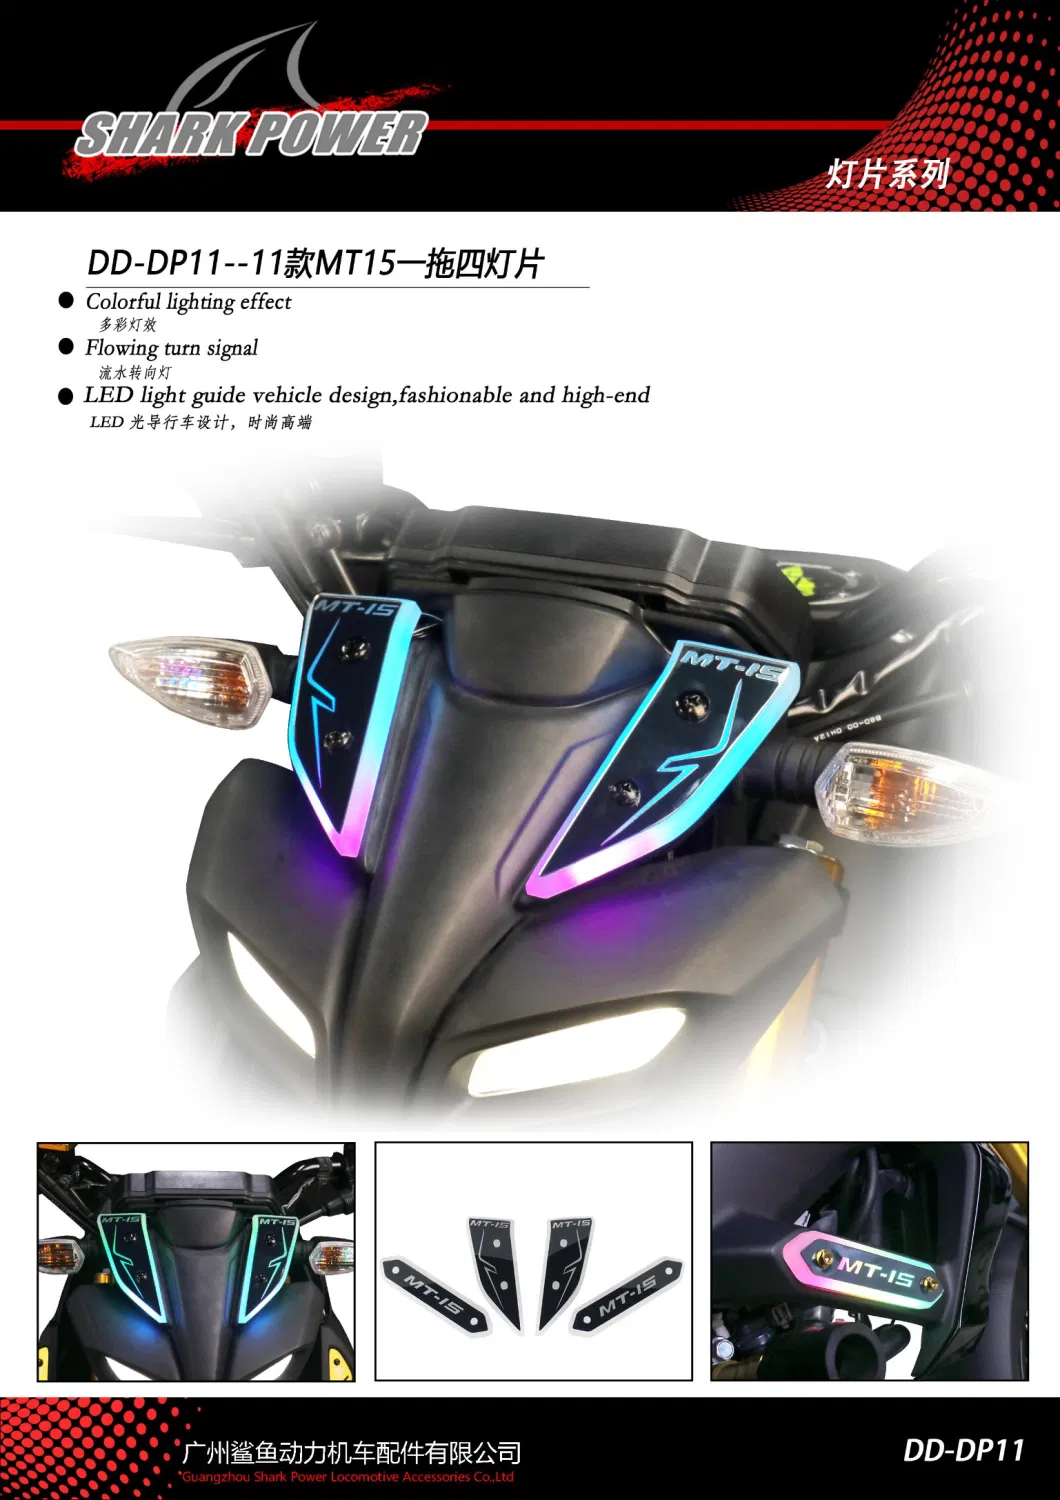 Motorcycle Accessories Body Parts Decorative Universal Fit Flexible LED Strip Waterproof Light for YAMAHA Mt15